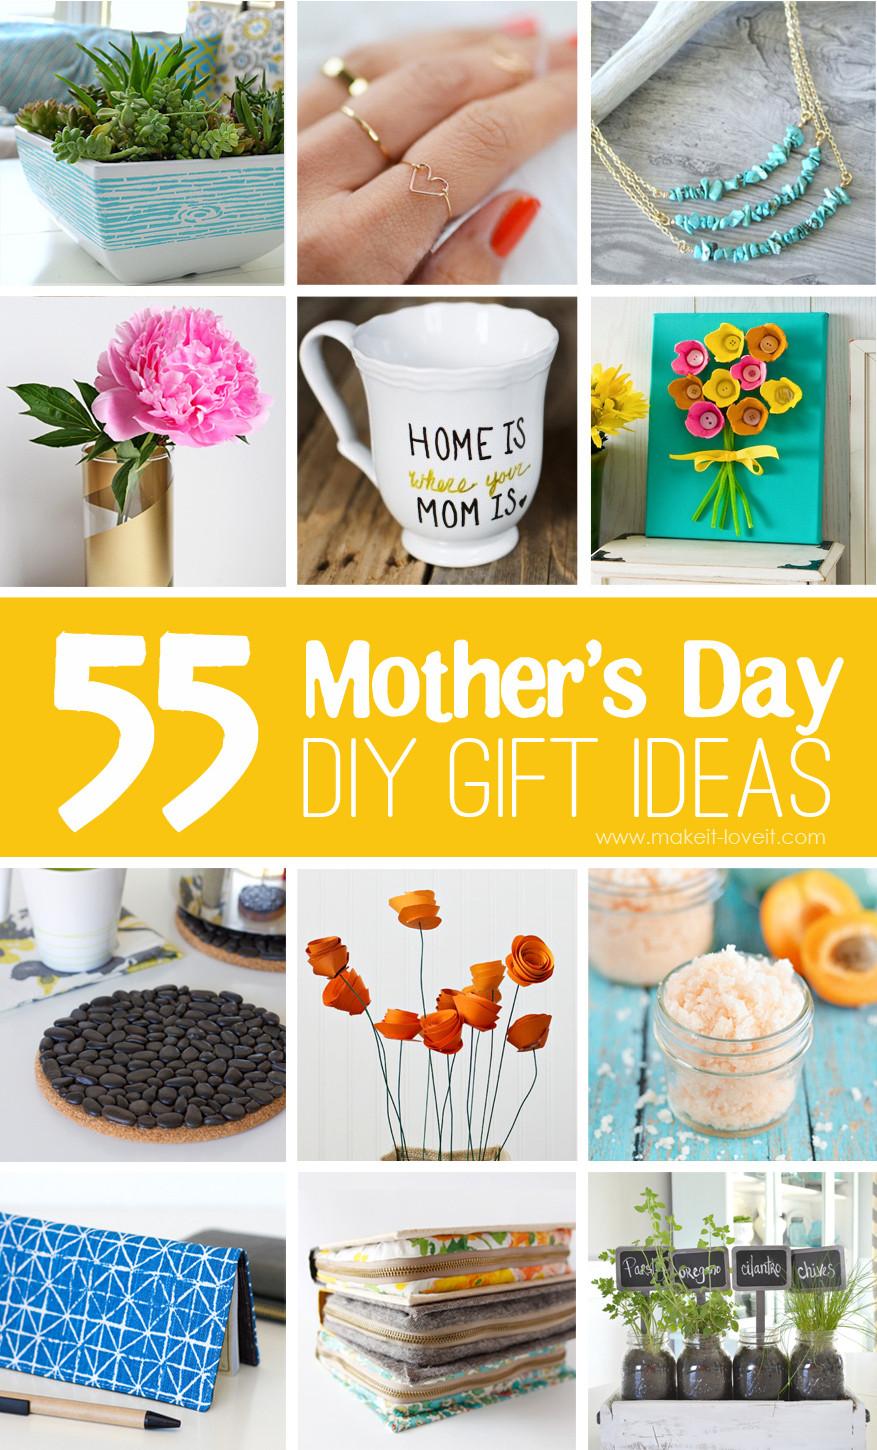 Diy Valentine'S Day Gift Ideas
 55 Mother s Day DIY Gift Ideas